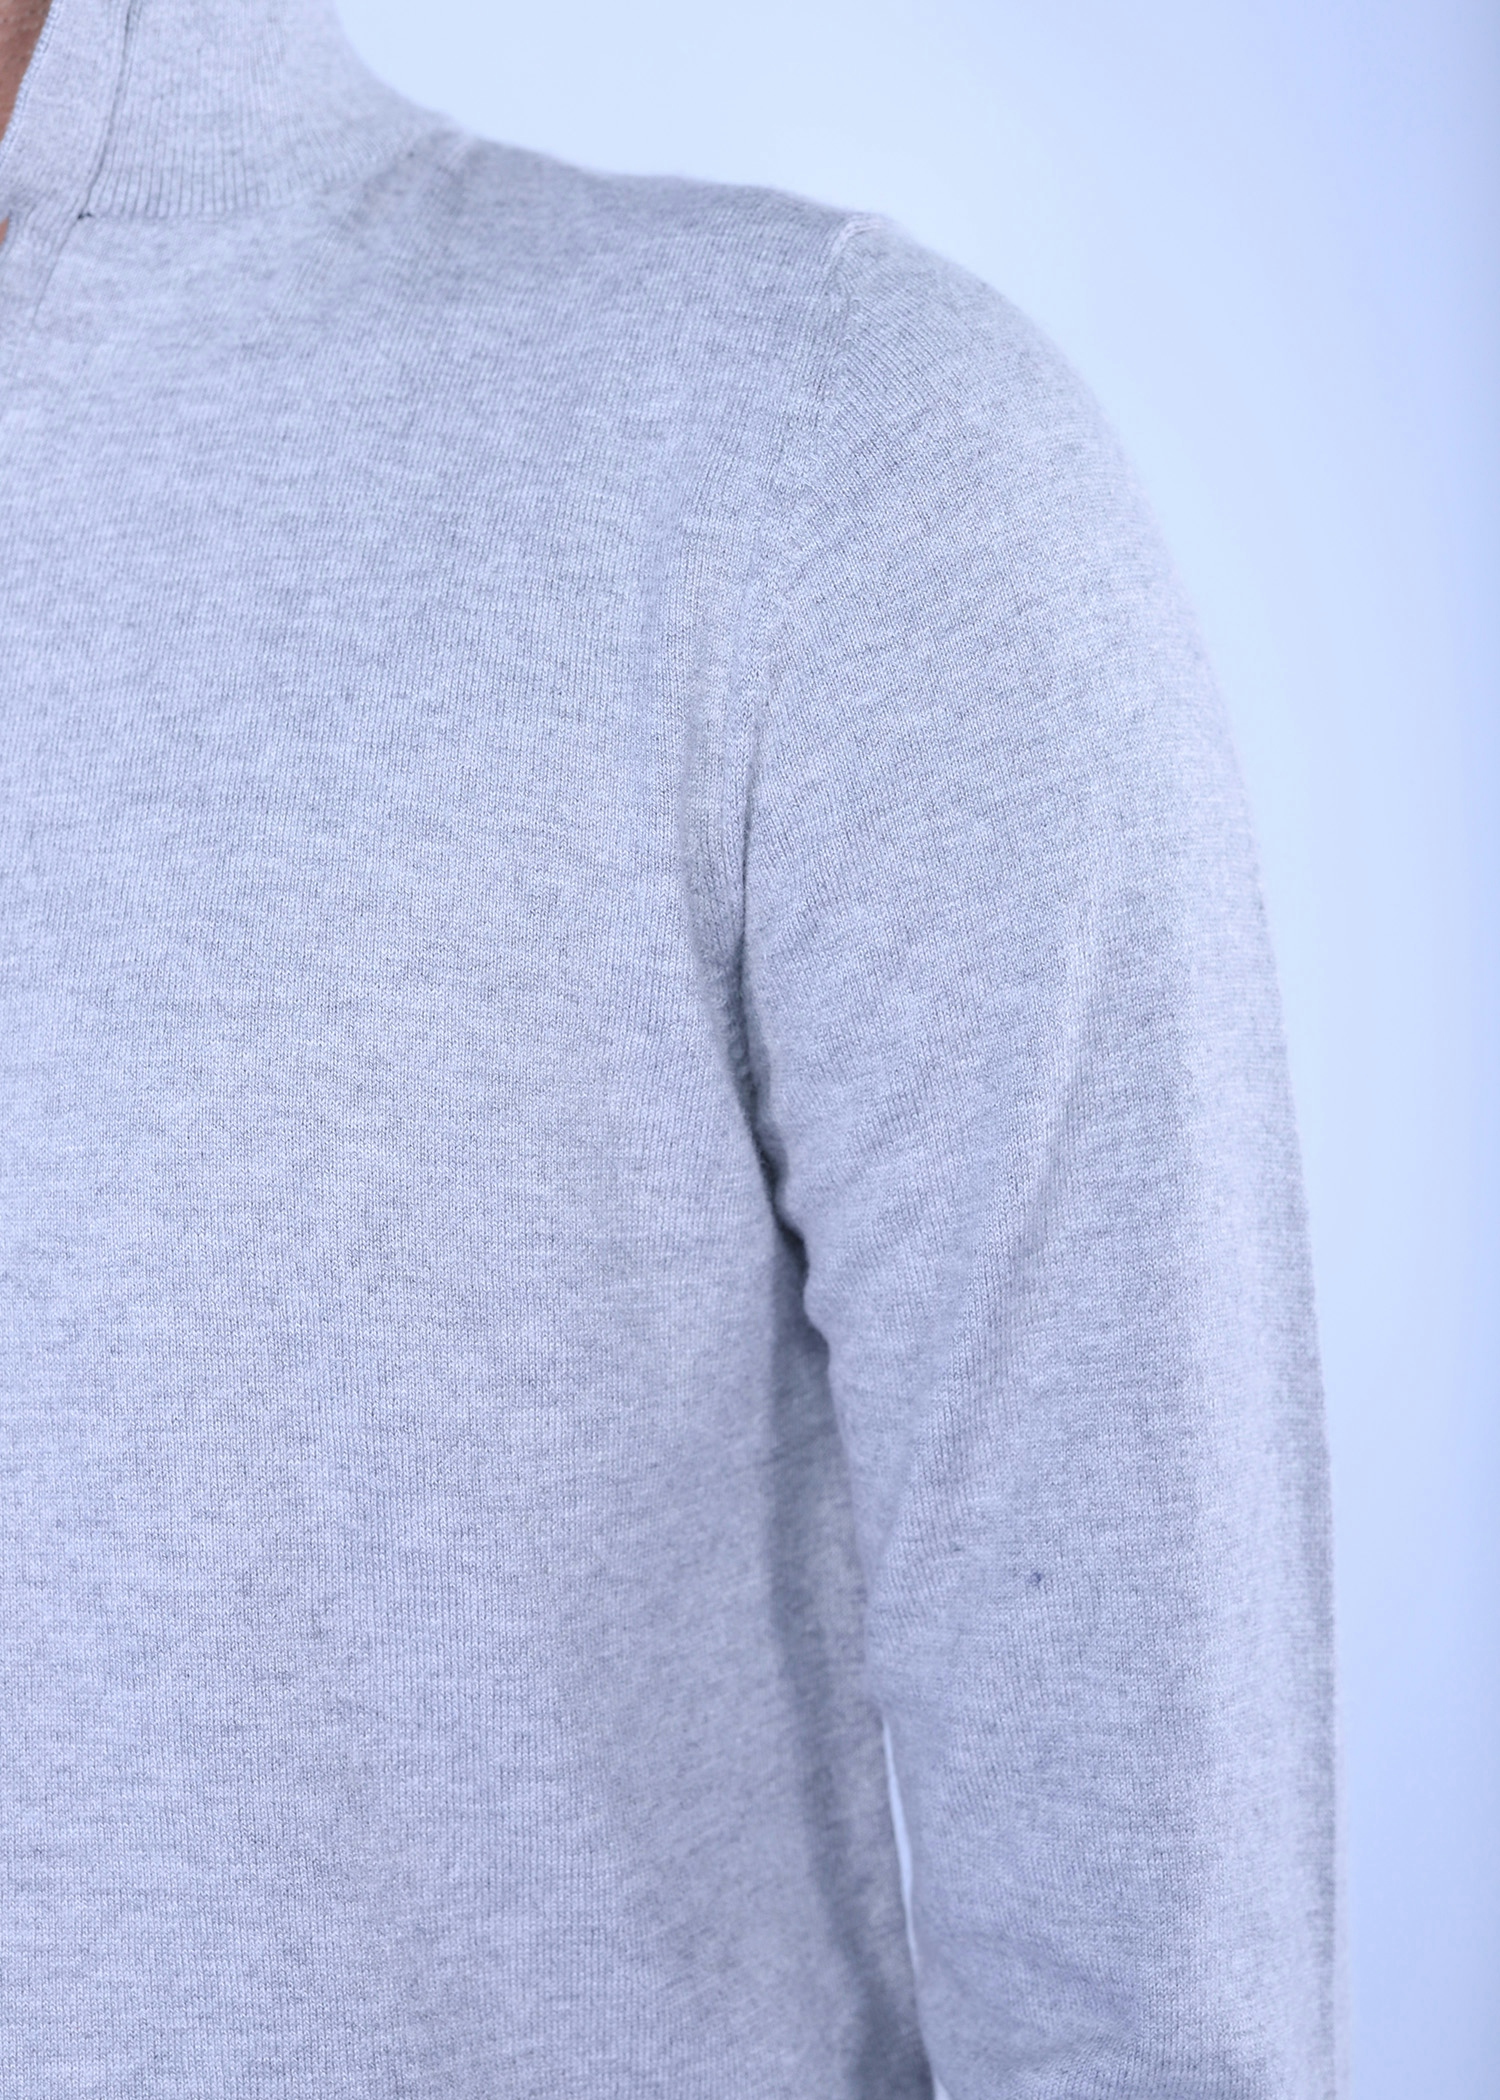 hornero i sweater grey color close front view